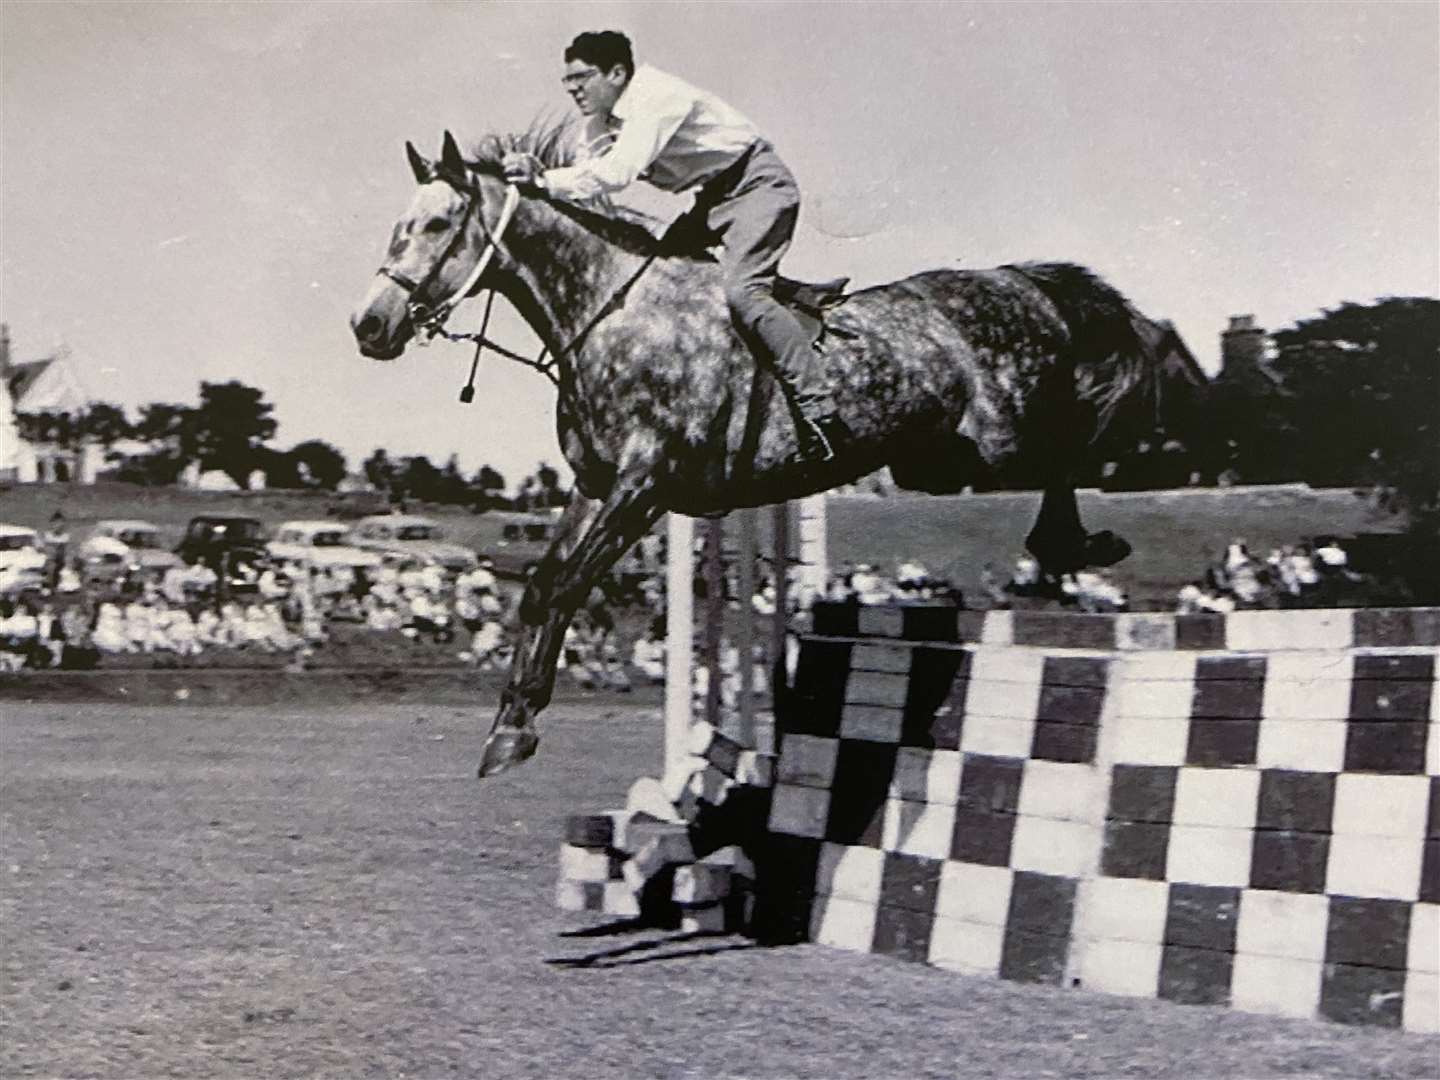 Taking part in the showjumping at the County Show was one of the things Morris Ronaldson excelled at and he won many trophies.